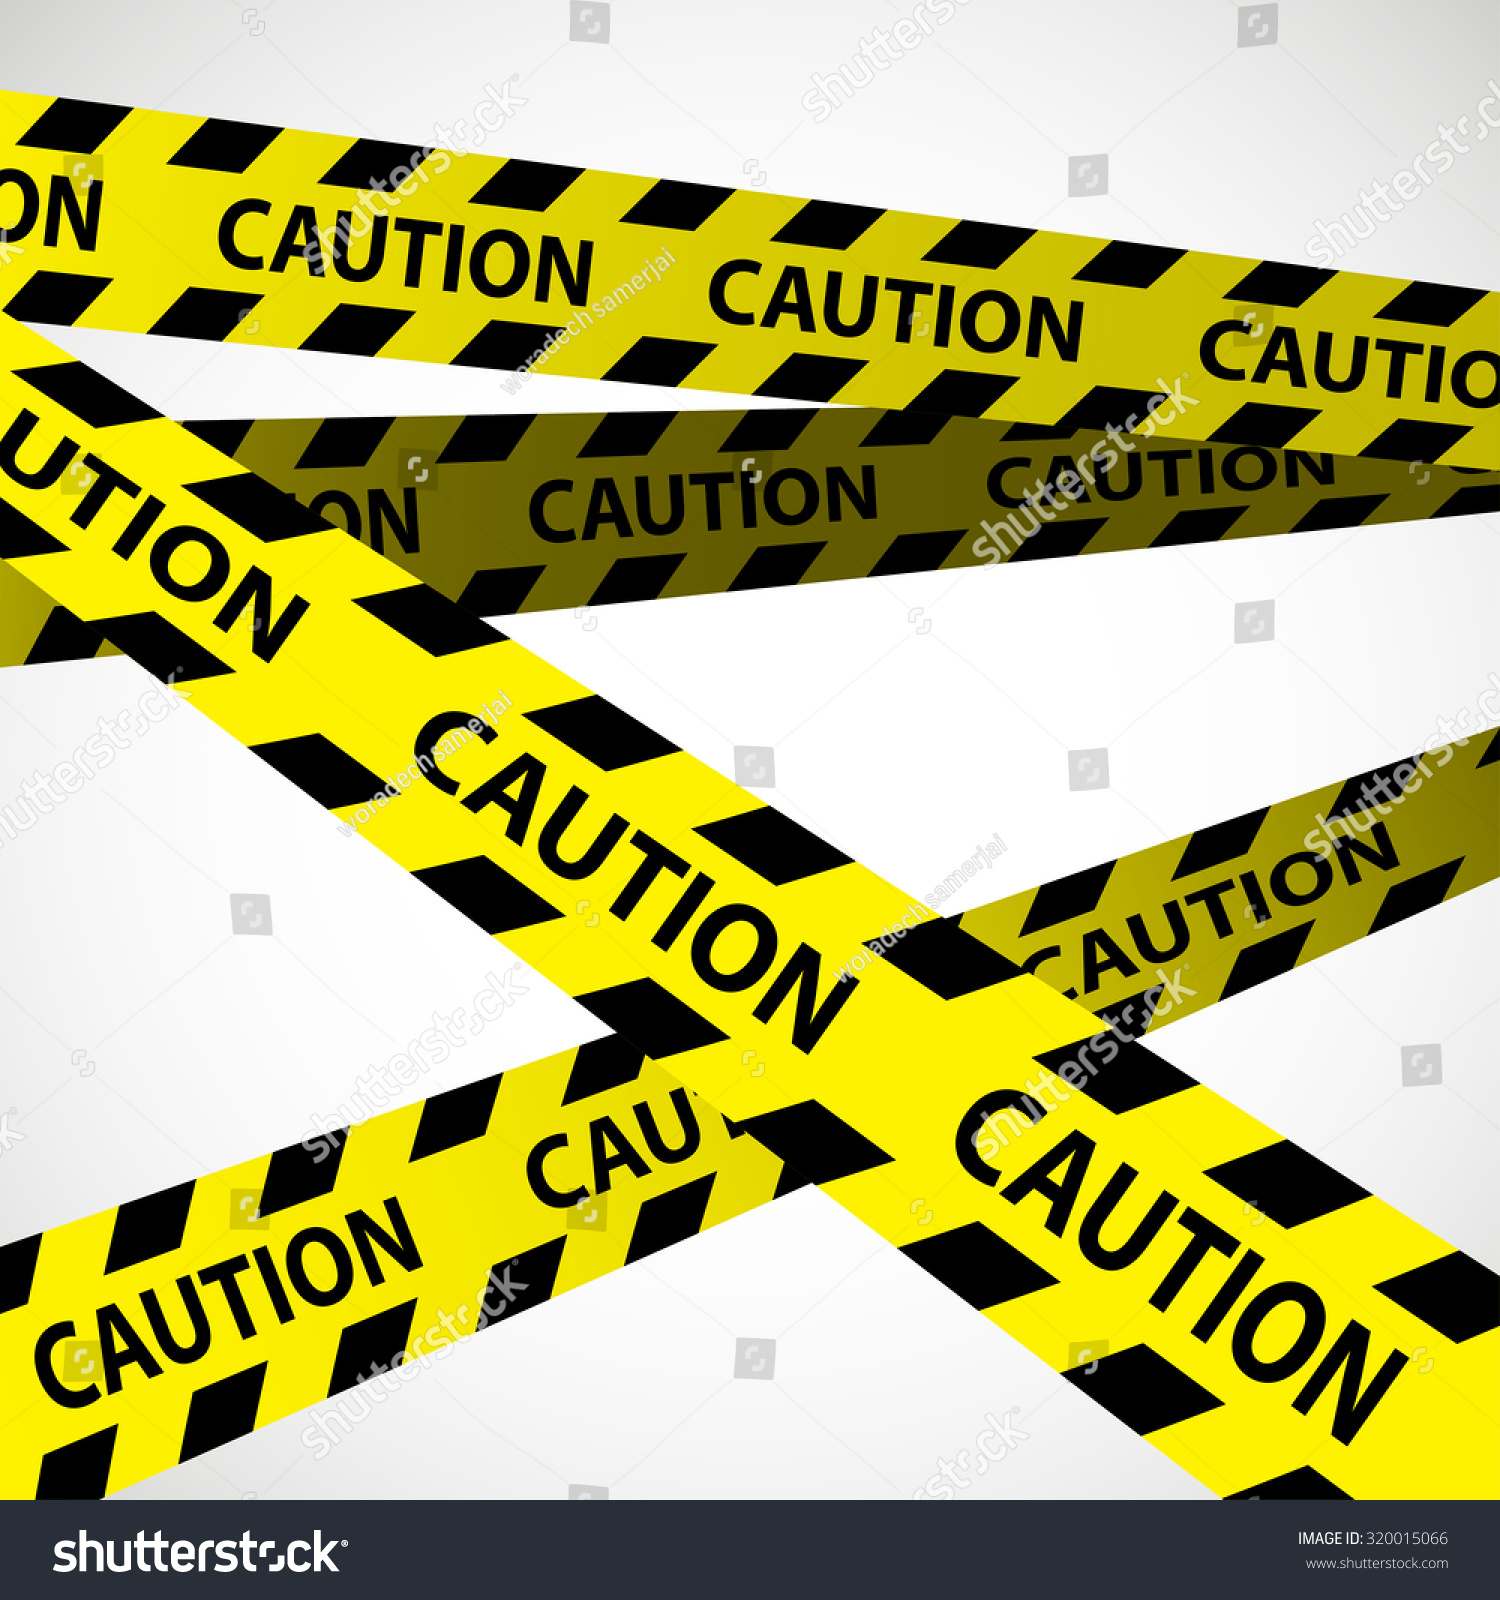 Caution Tape Design On White Background, Caution Stripes Stock Vector ...